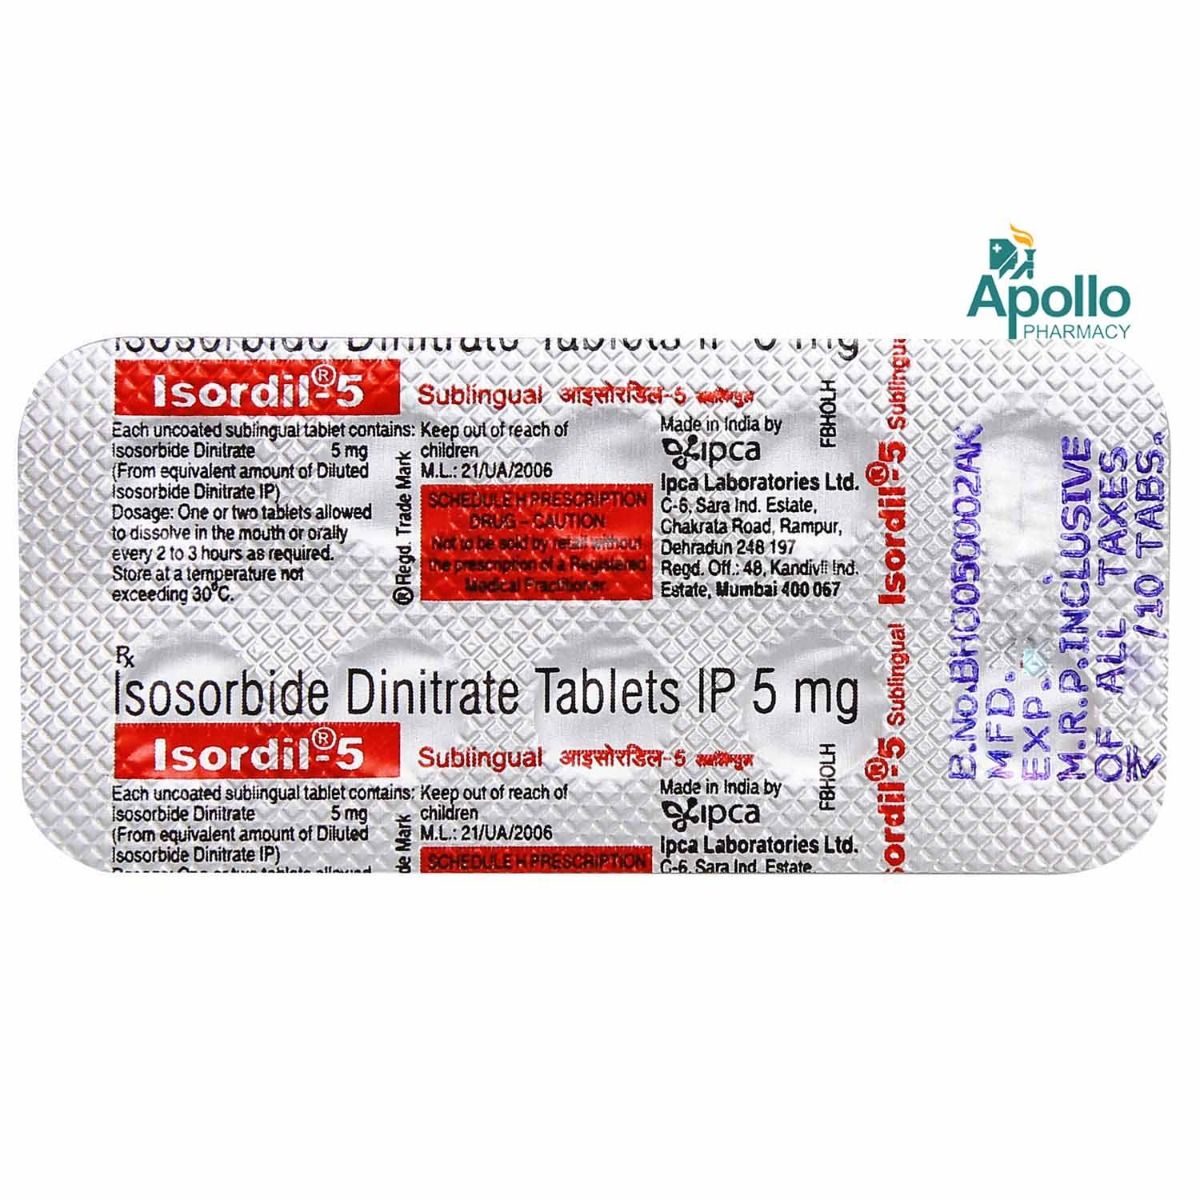 Isordil 5 Sublingual Tablet 10's, Pack of 10 TABLETS